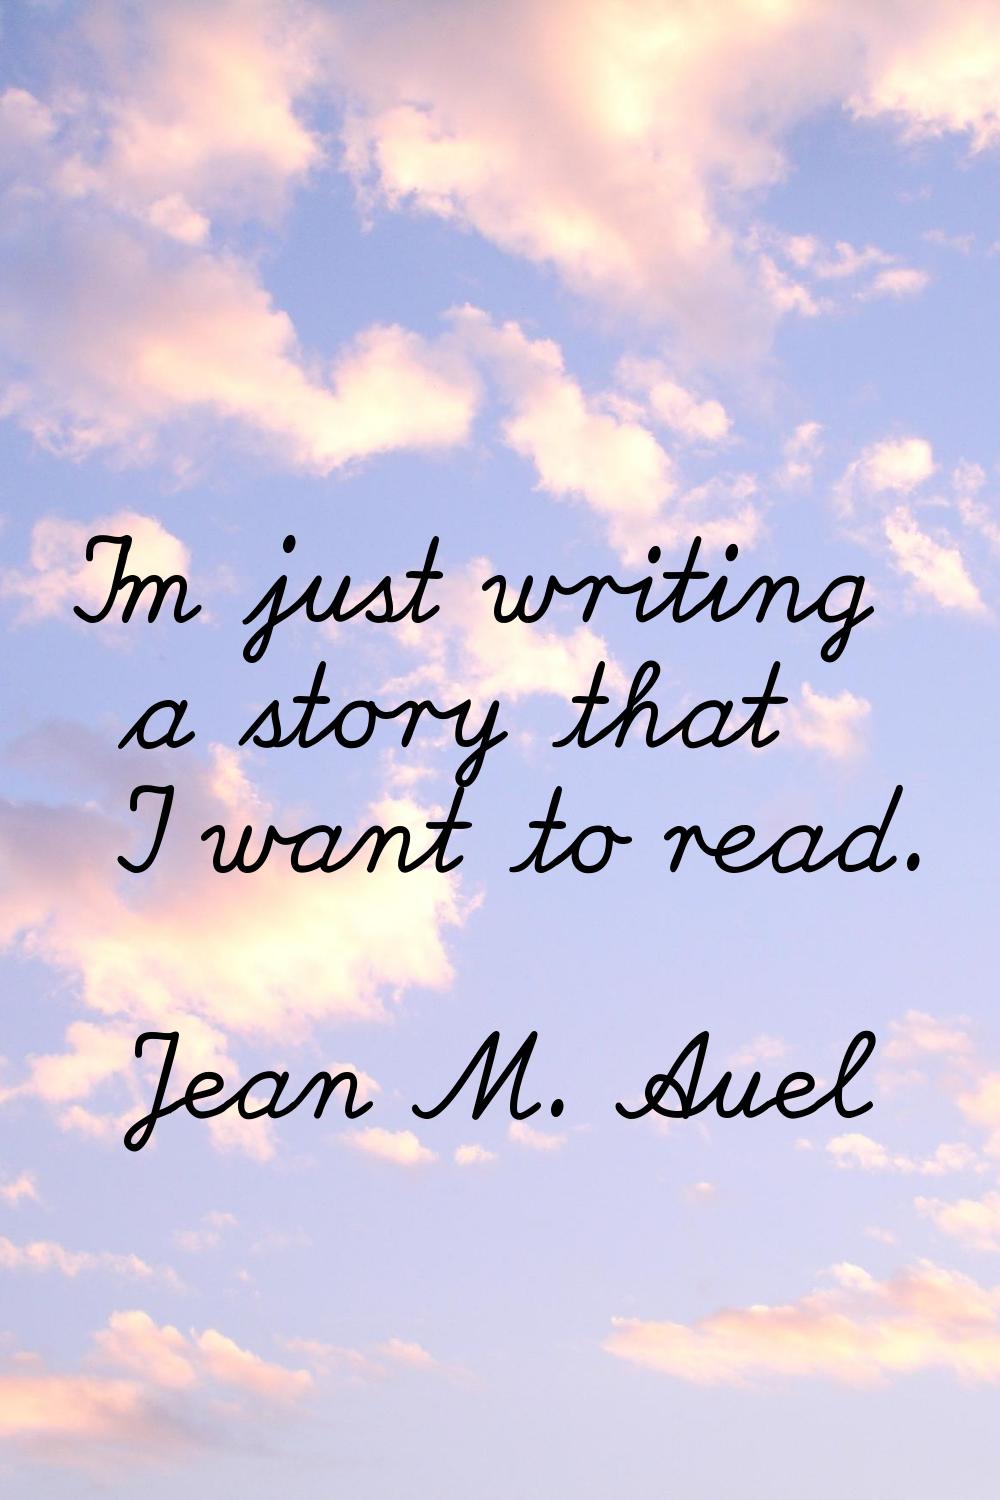 I'm just writing a story that I want to read.